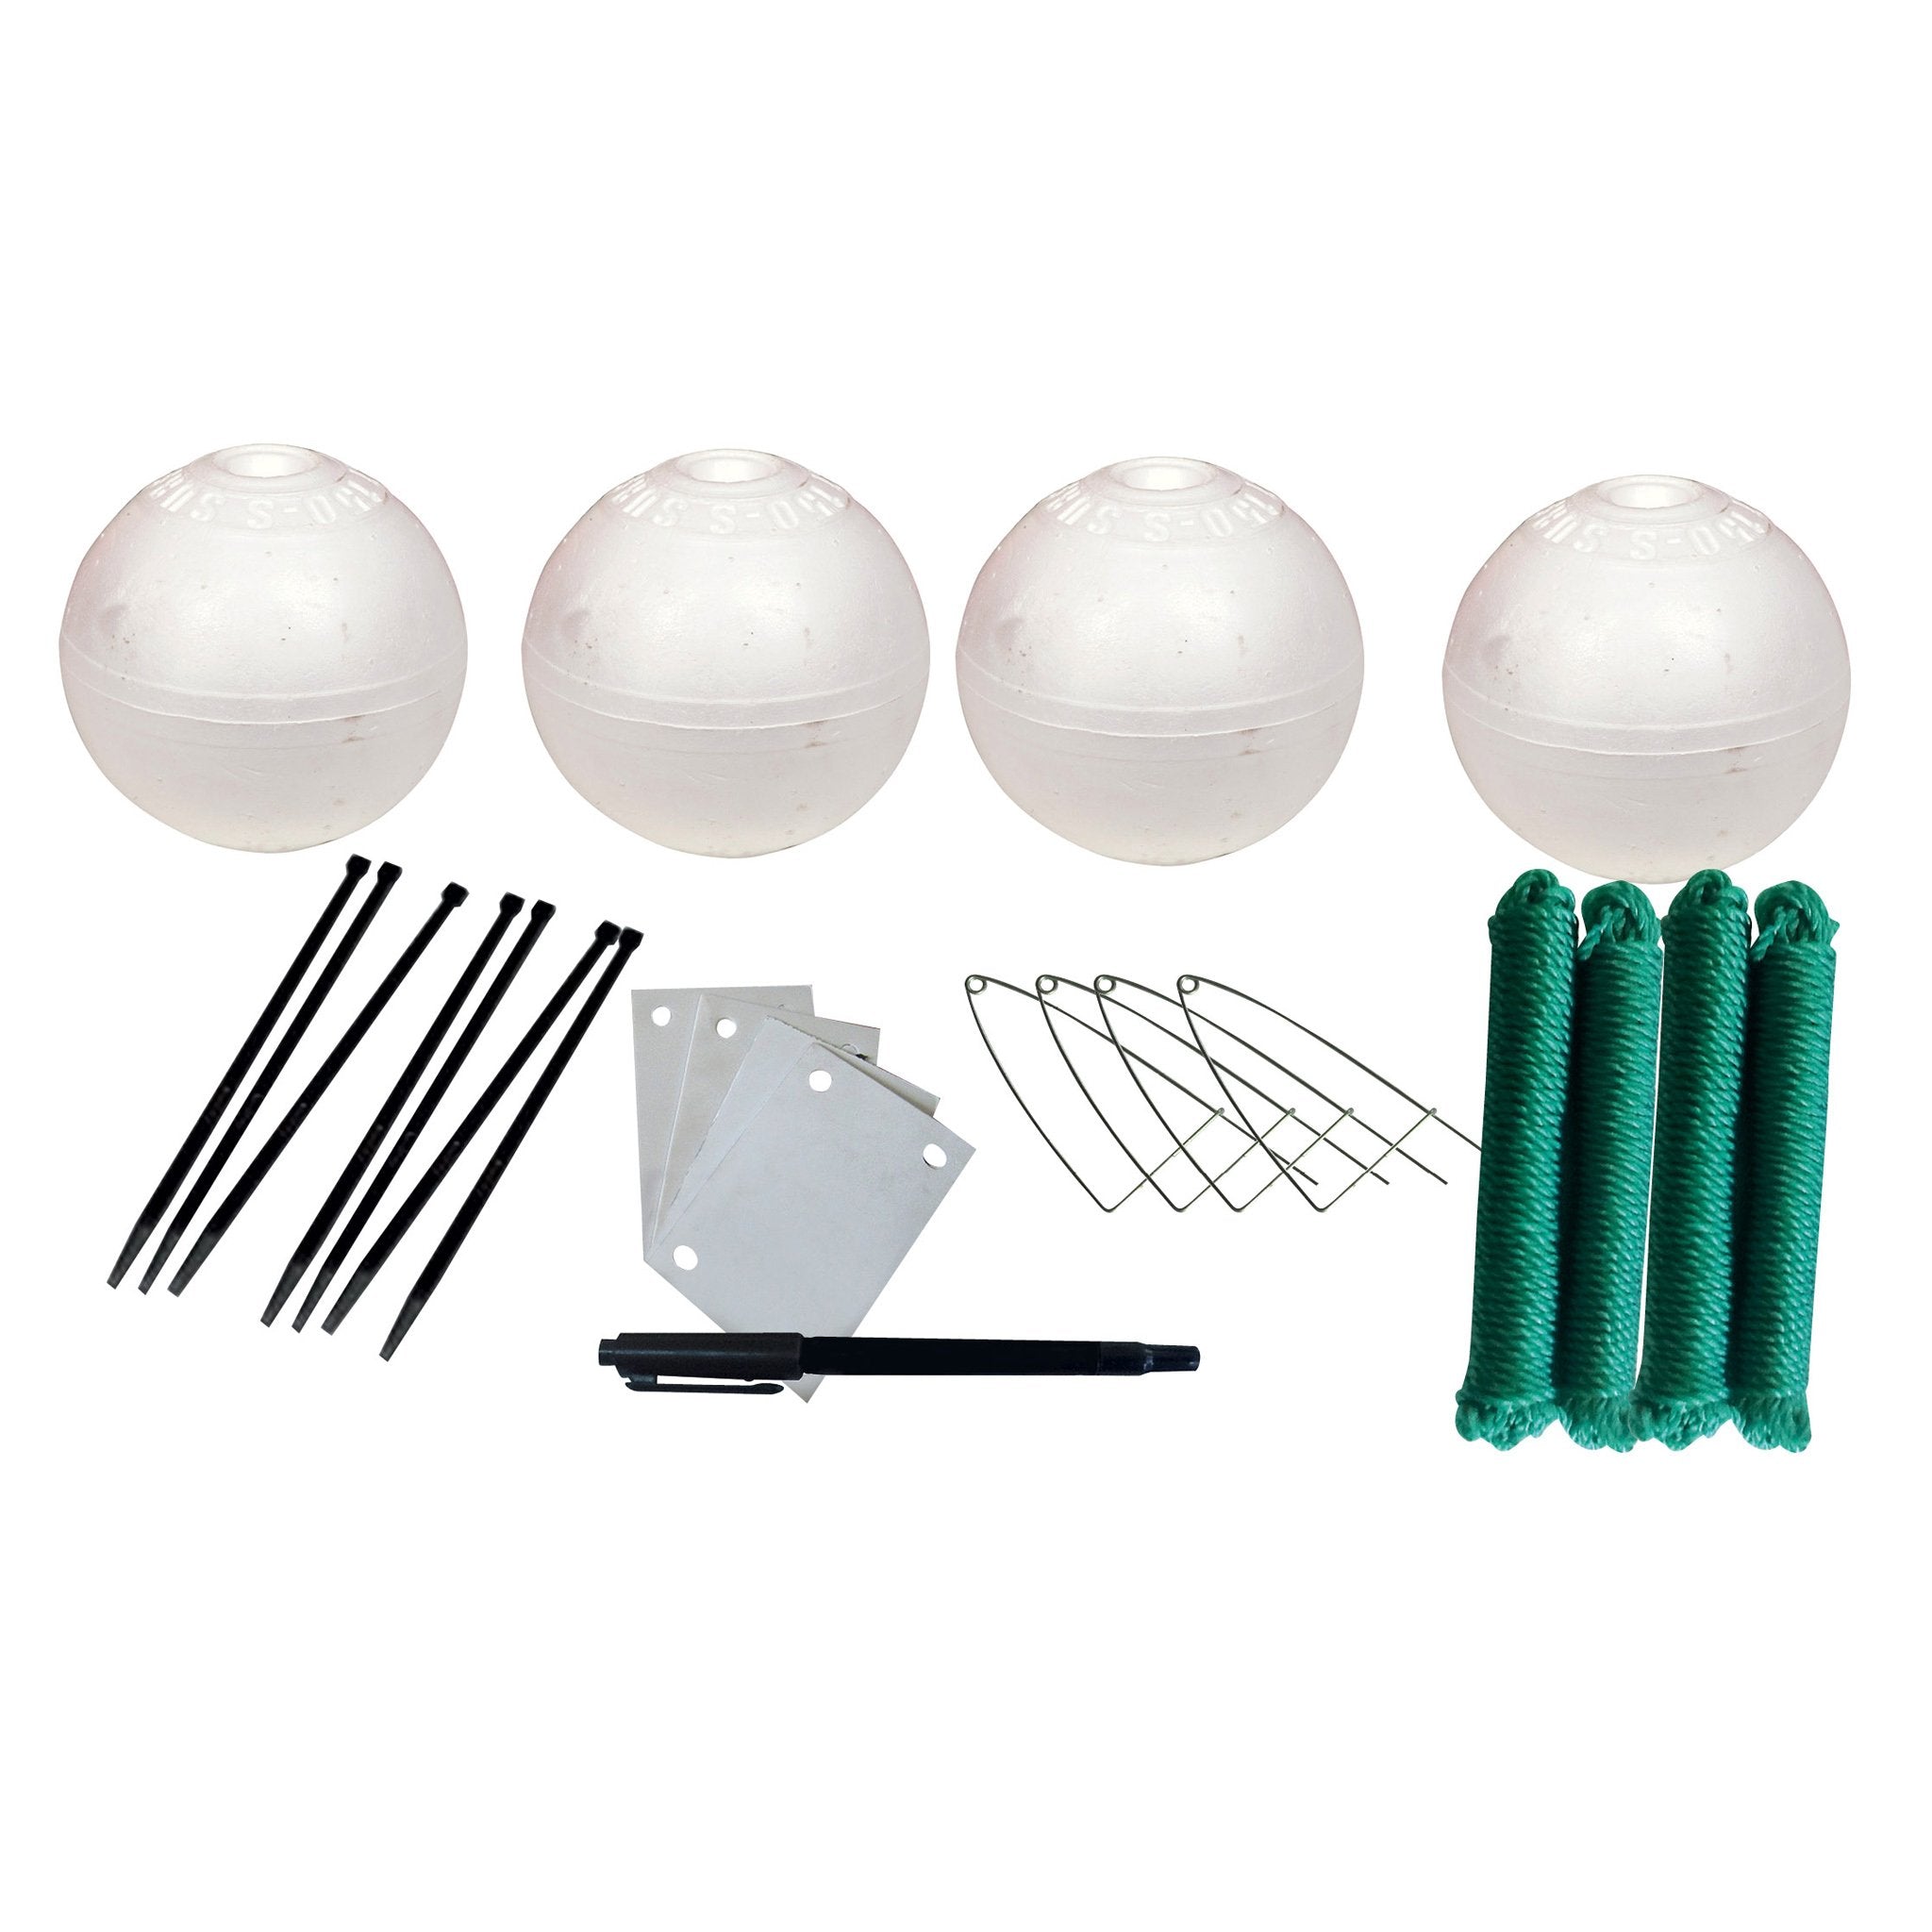 Net Factory Crabbing Accessory Kit Small (100mm Floats) - Jarvis